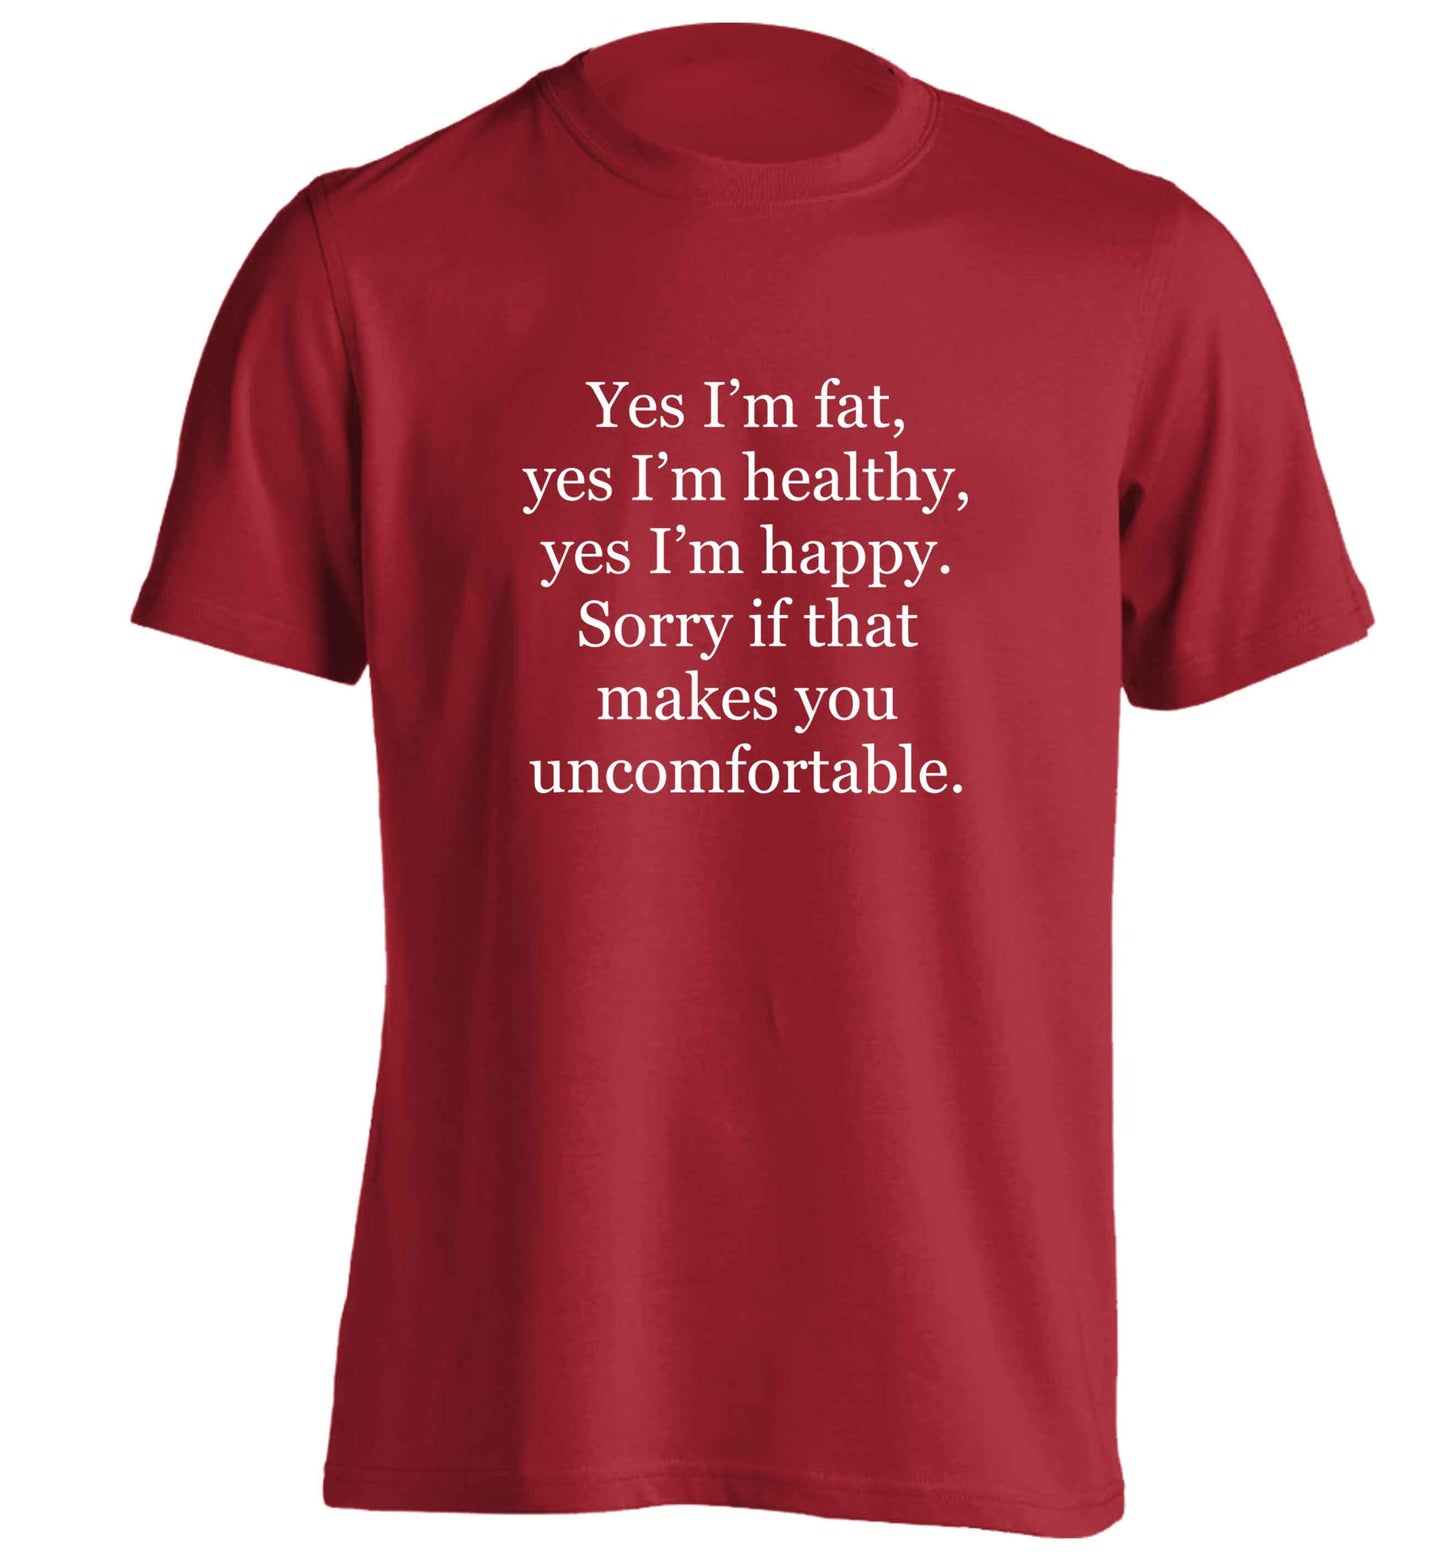 Yes I'm fat, yes I'm healthy, yes I'm happy. Sorry if that makes you uncomfortable adults unisex red Tshirt 2XL